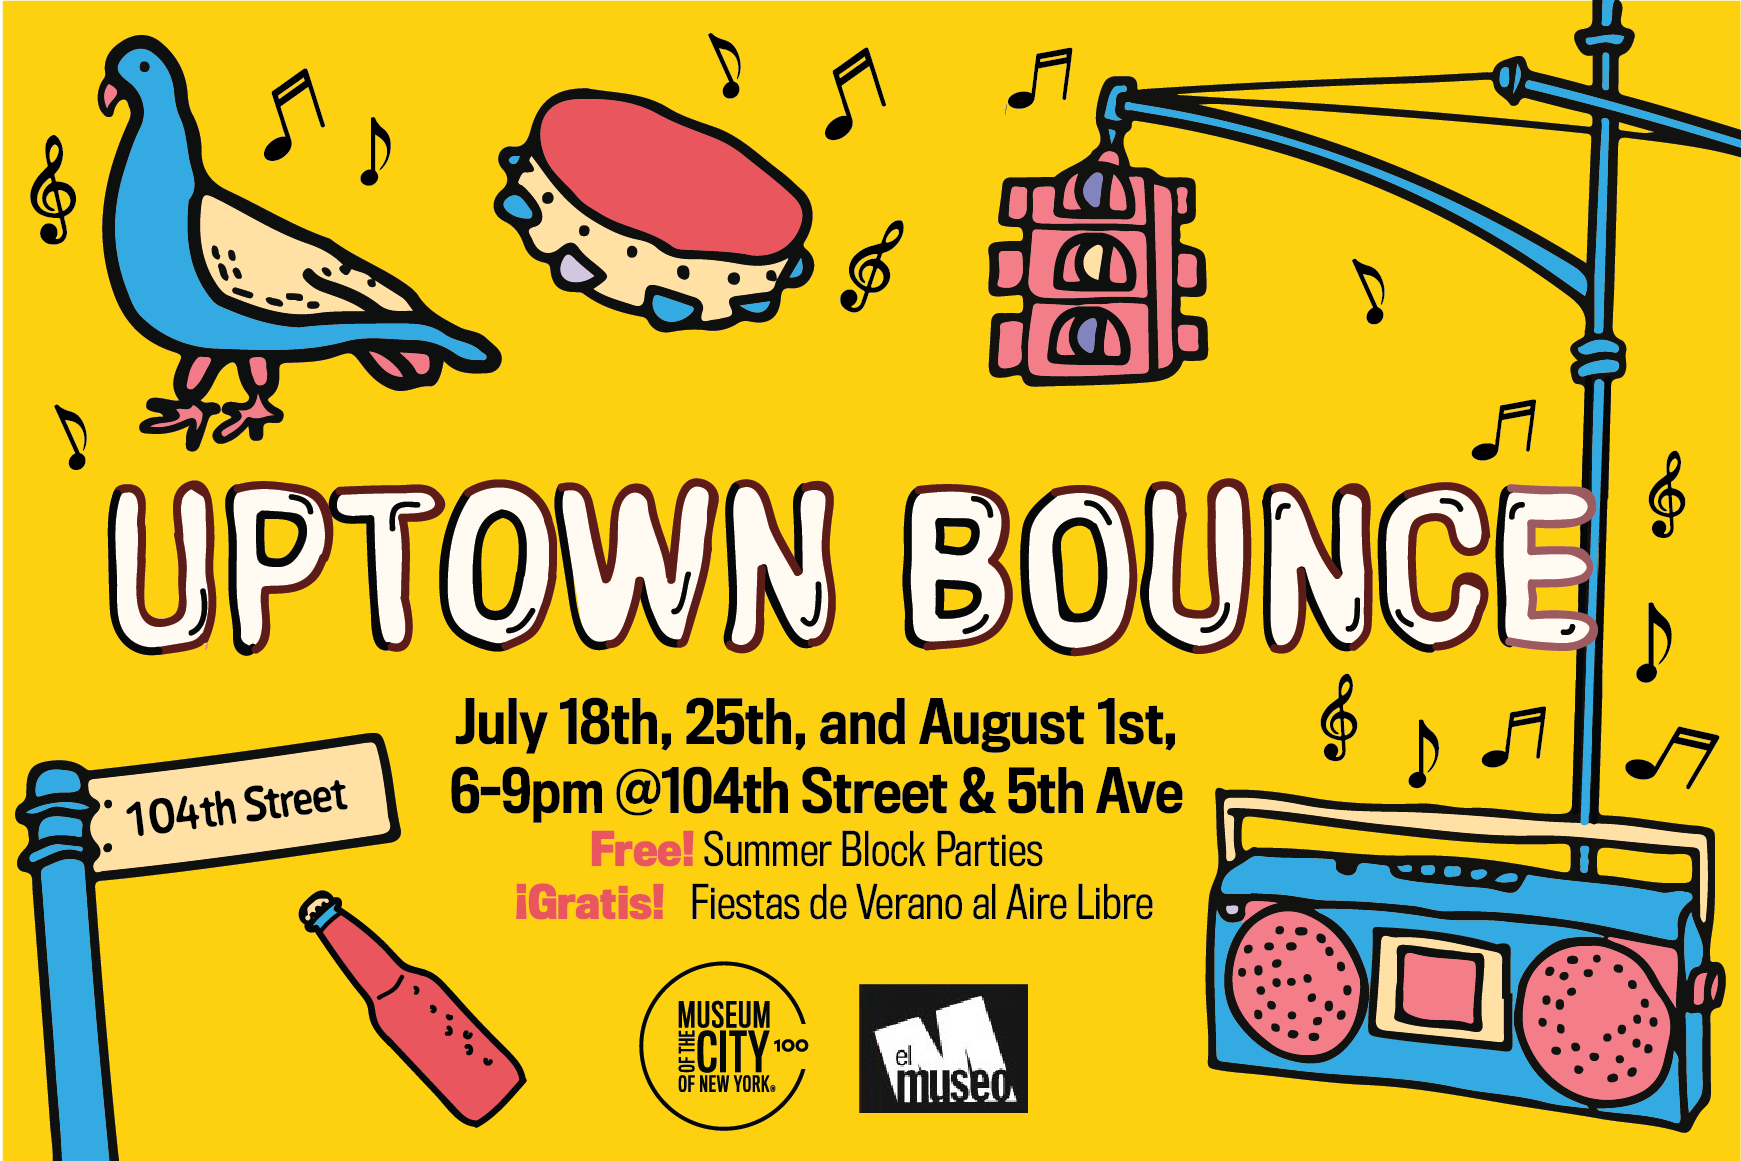 Illustrations of a street sign, boombox, tambourine, pigeon, and more around the title of "Uptown Bounce."